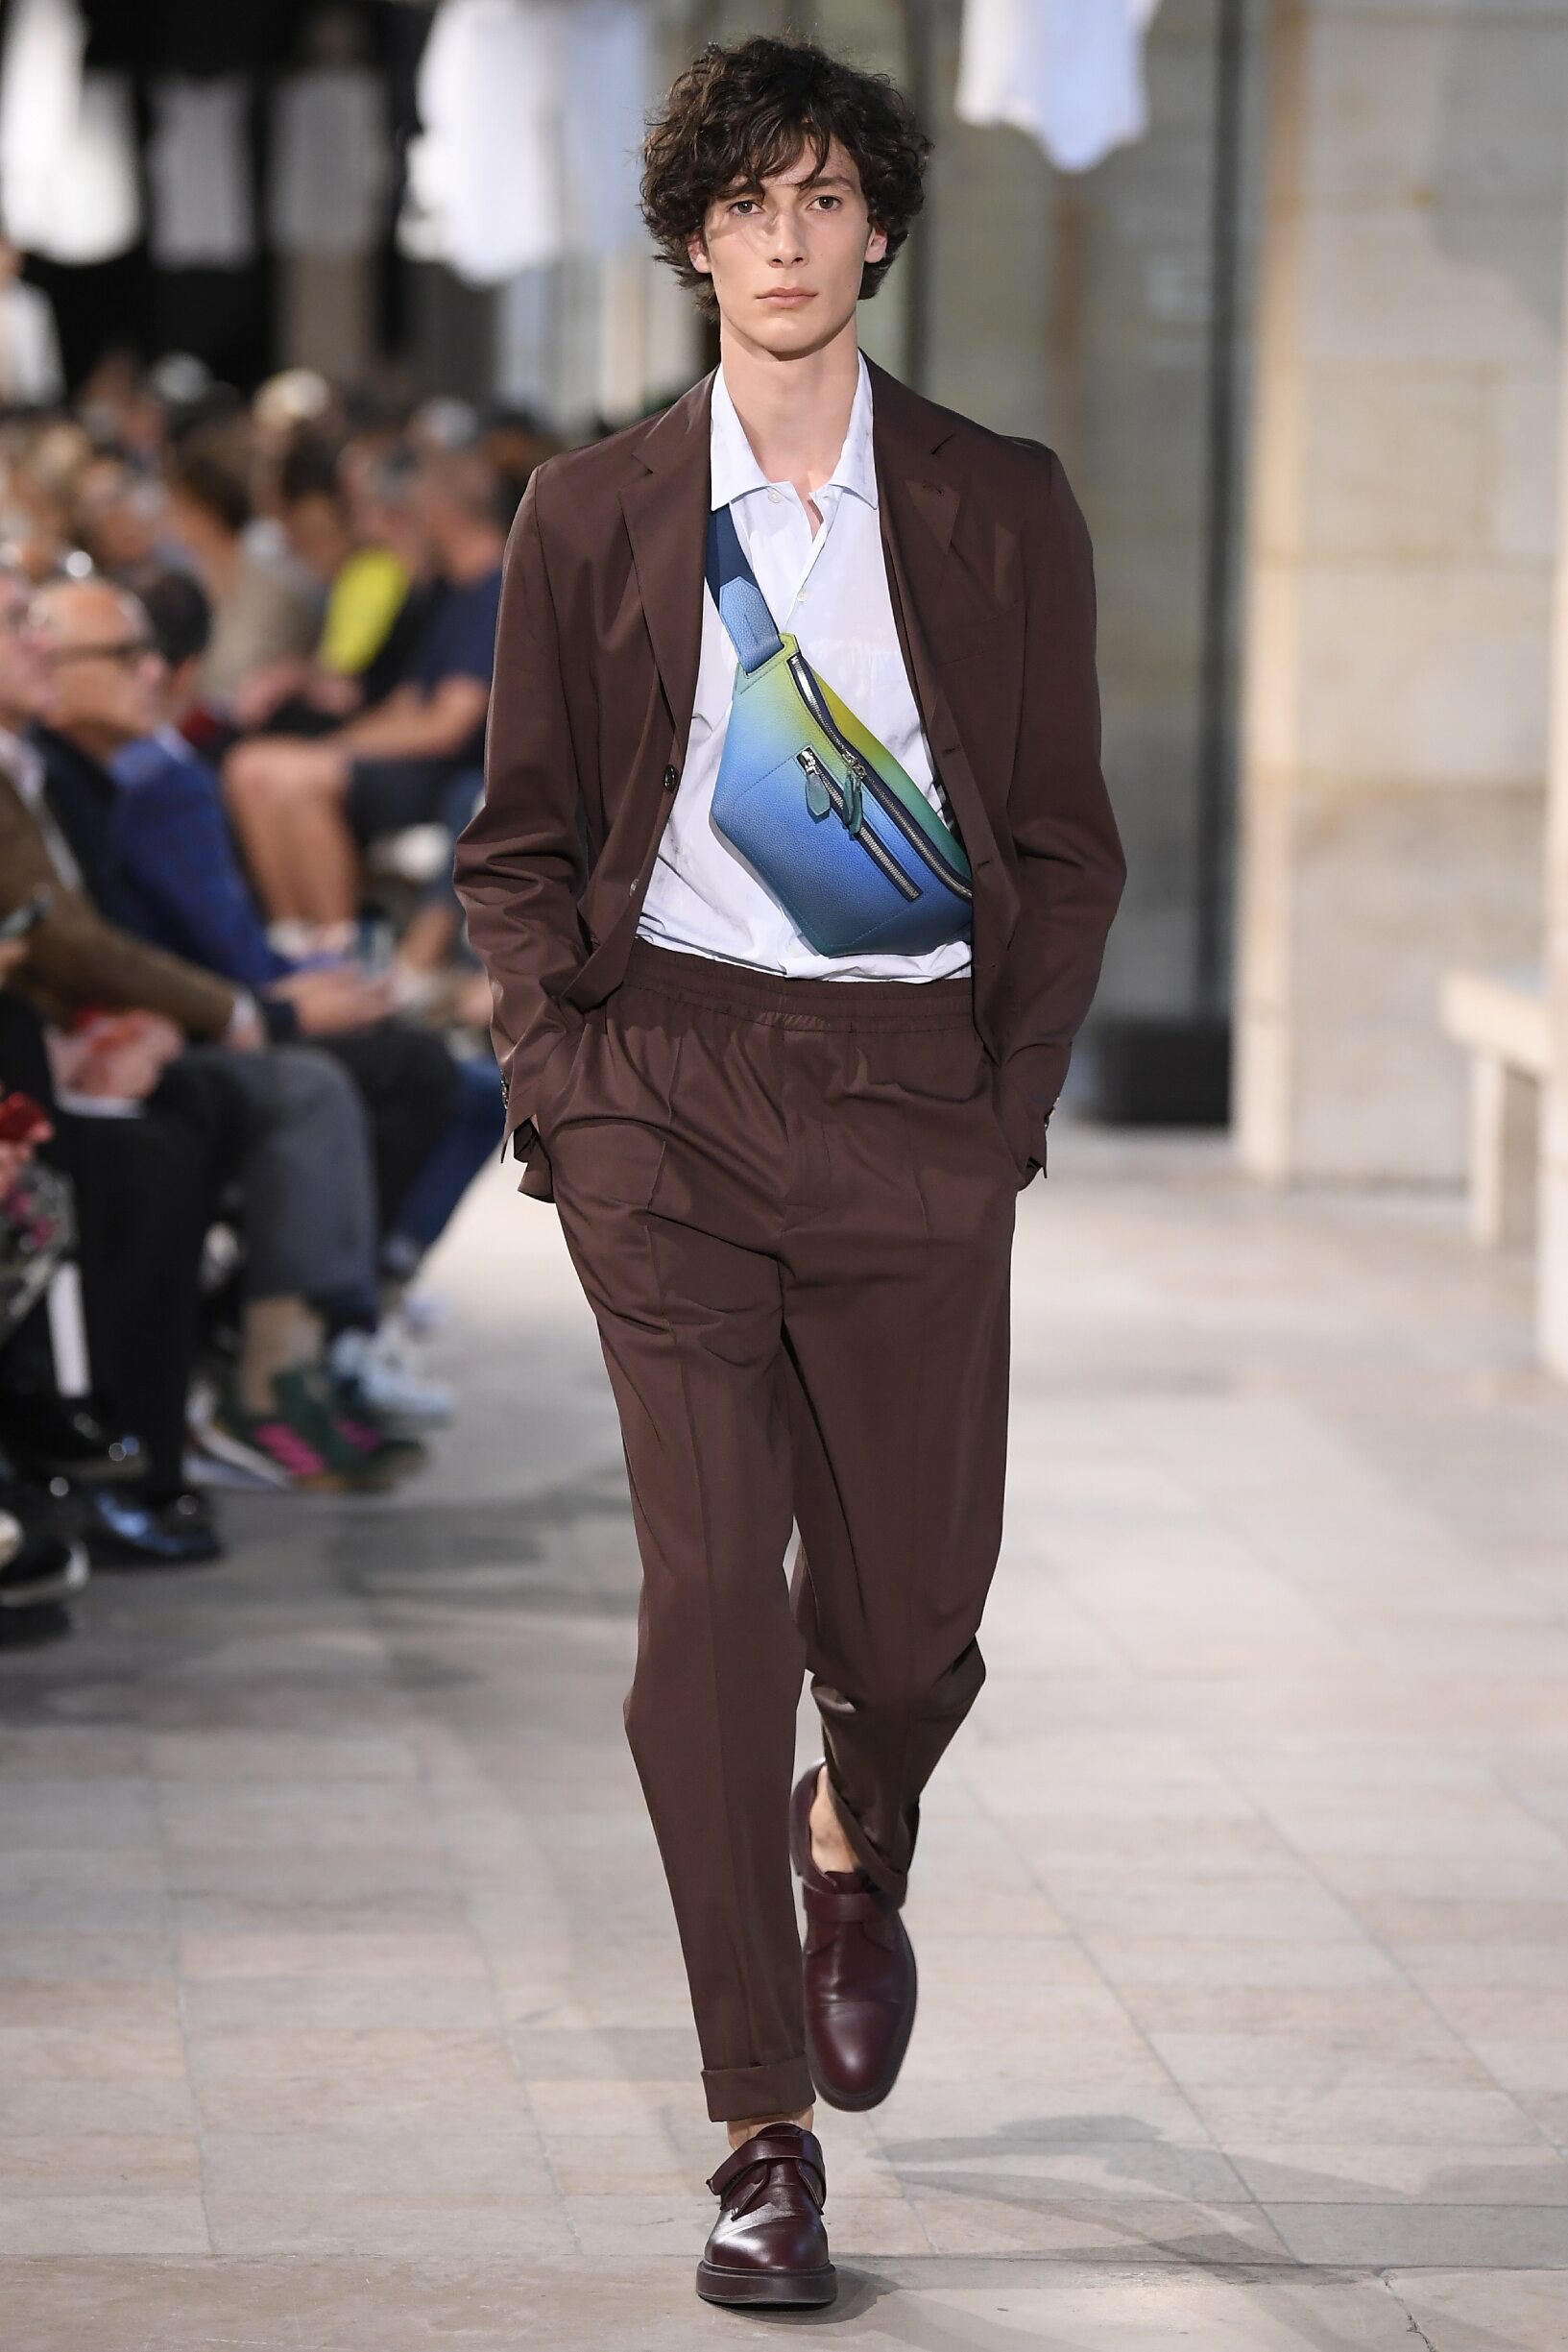 HERMÈS SPRING SUMMER 2019 MEN’S COLLECTION | The Skinny Beep